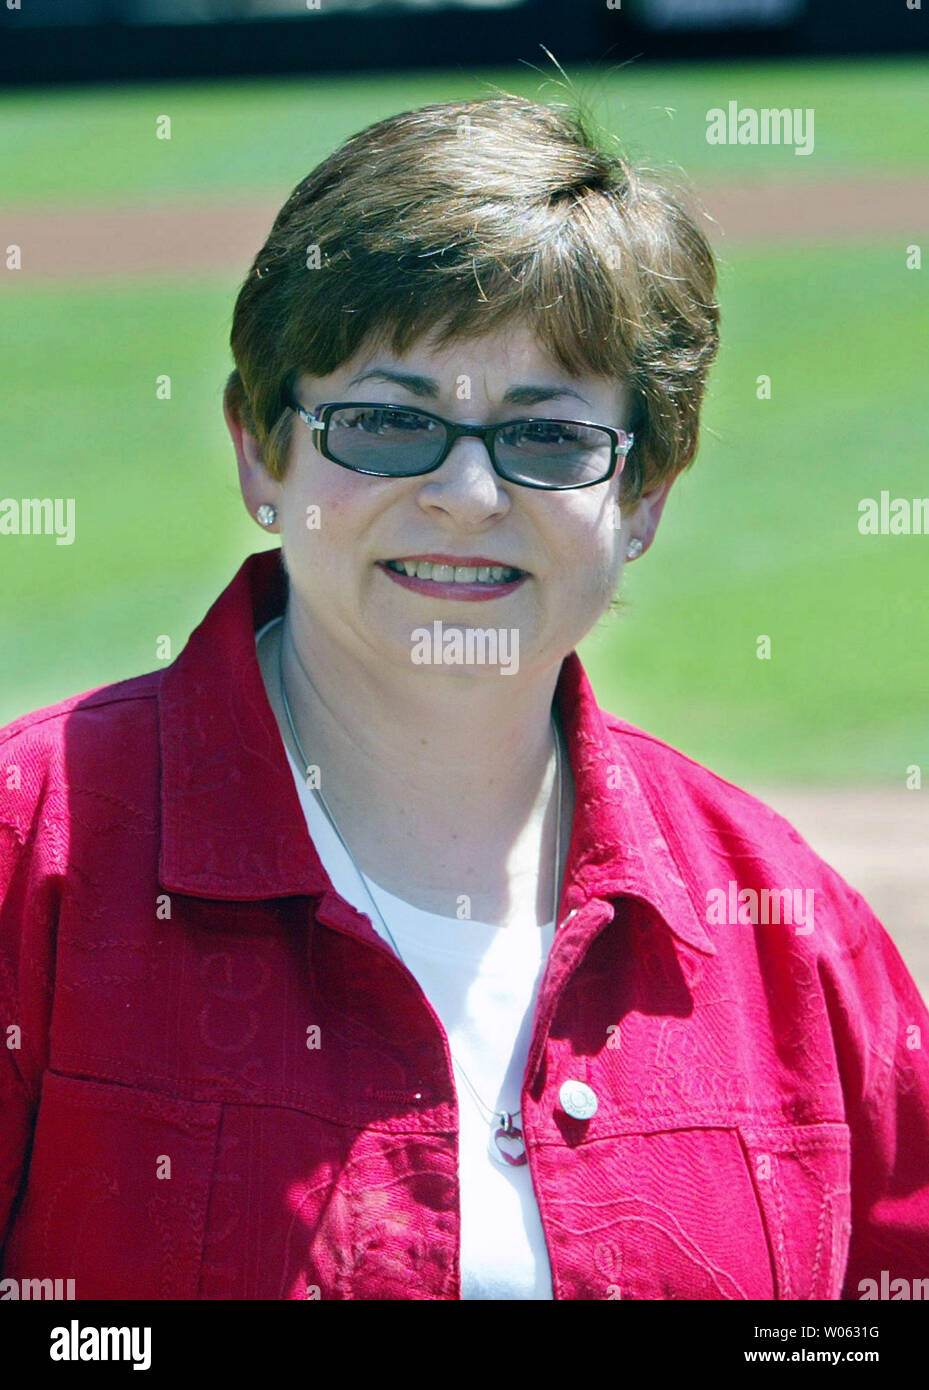 Maxine Clark, founder of Build-A-Bear Workshop is introduced before a game between the San Francisco Giants and the St. Louis Cardinals at Busch Stadium in St. Louis on August 21, 2005.  (UPI Photo/Bill Greenblatt) Stock Photo